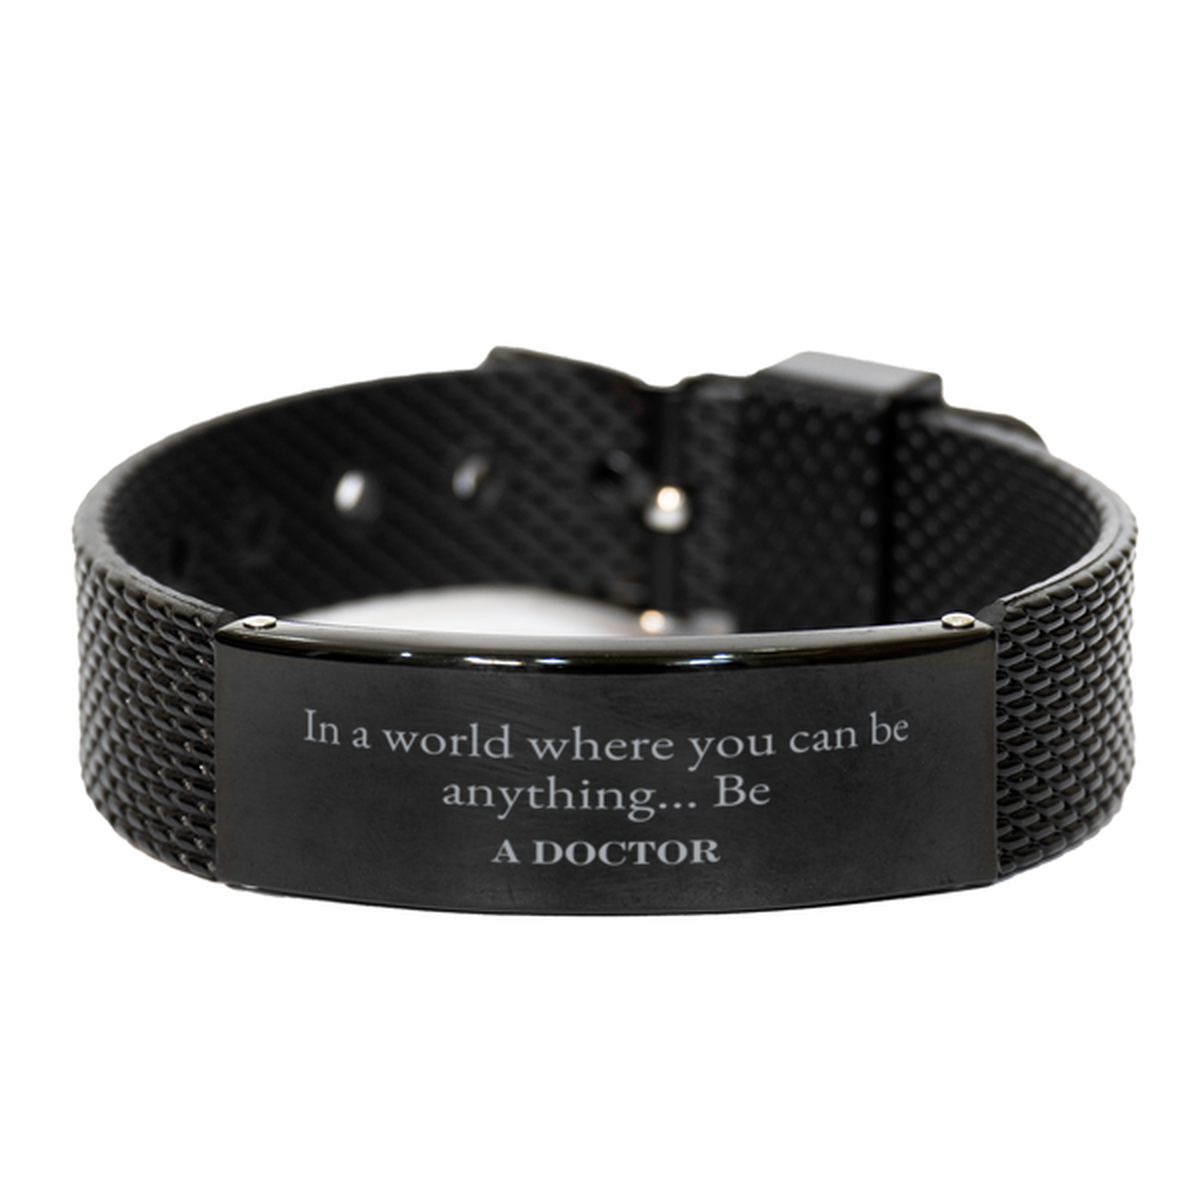 Gifts for Doctor, In a world where you can be anything, Appreciation Birthday Black Shark Mesh Bracelet for Men, Women, Friends, Coworkers